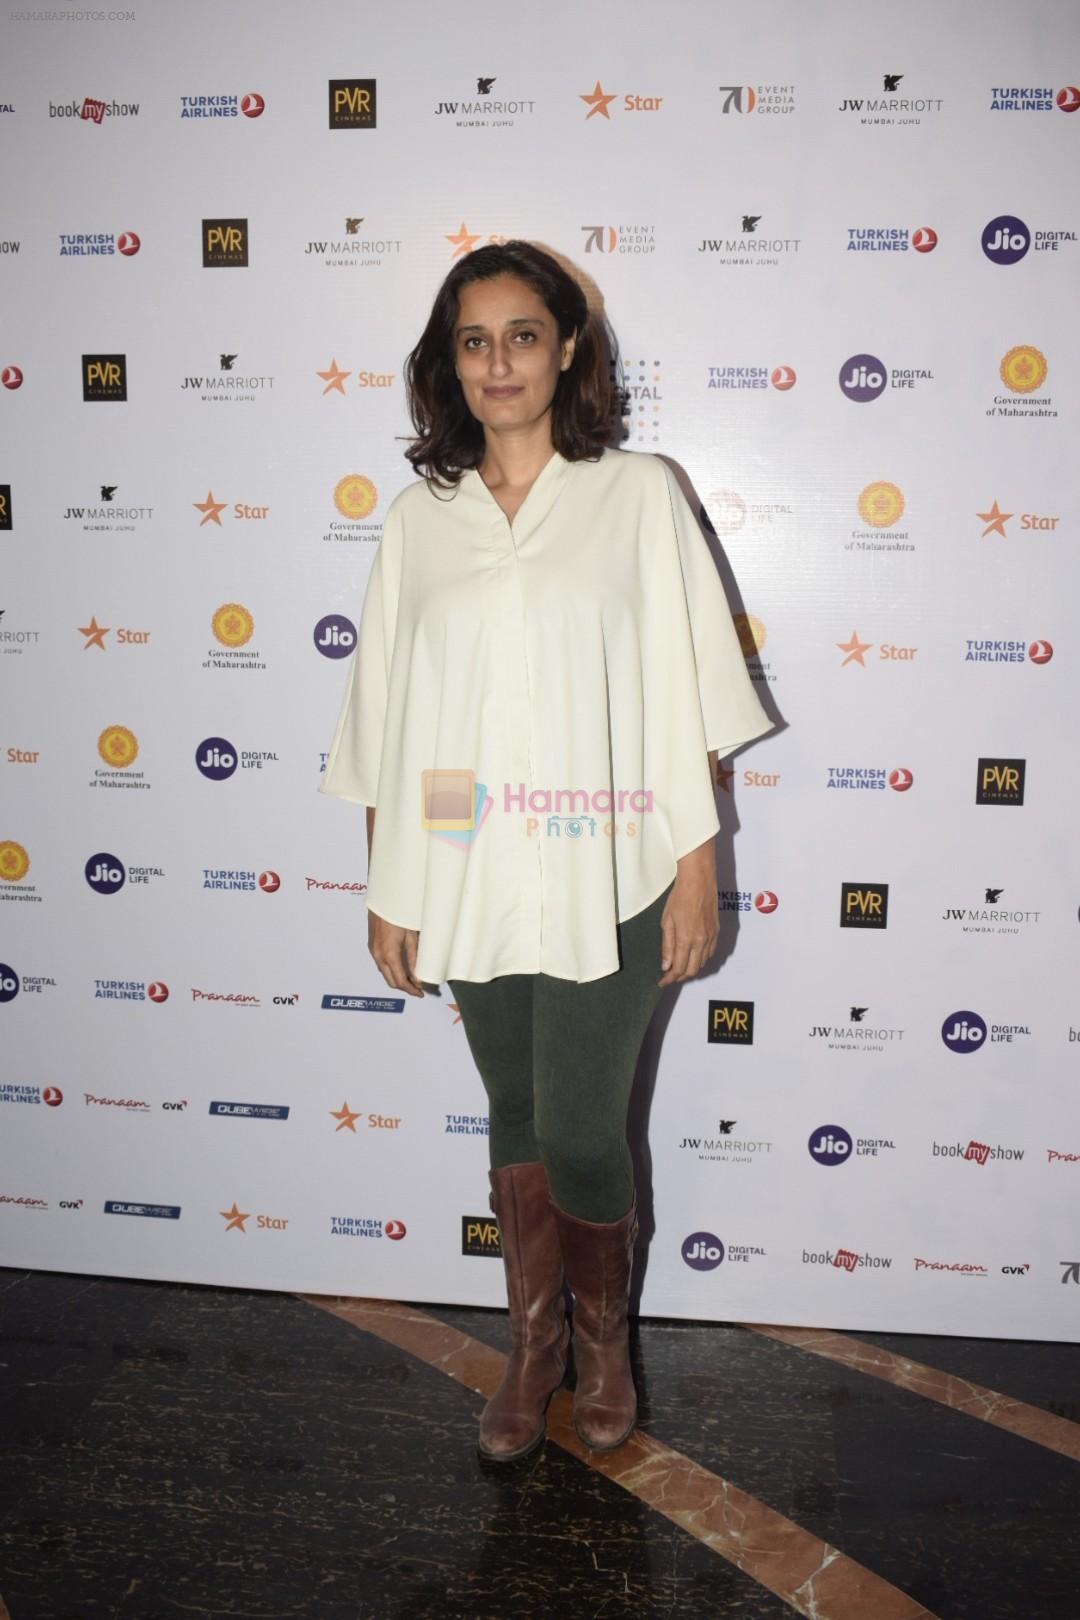 at Mami #Metoo session at pvr ecx in andheri on 30th Oct 2018